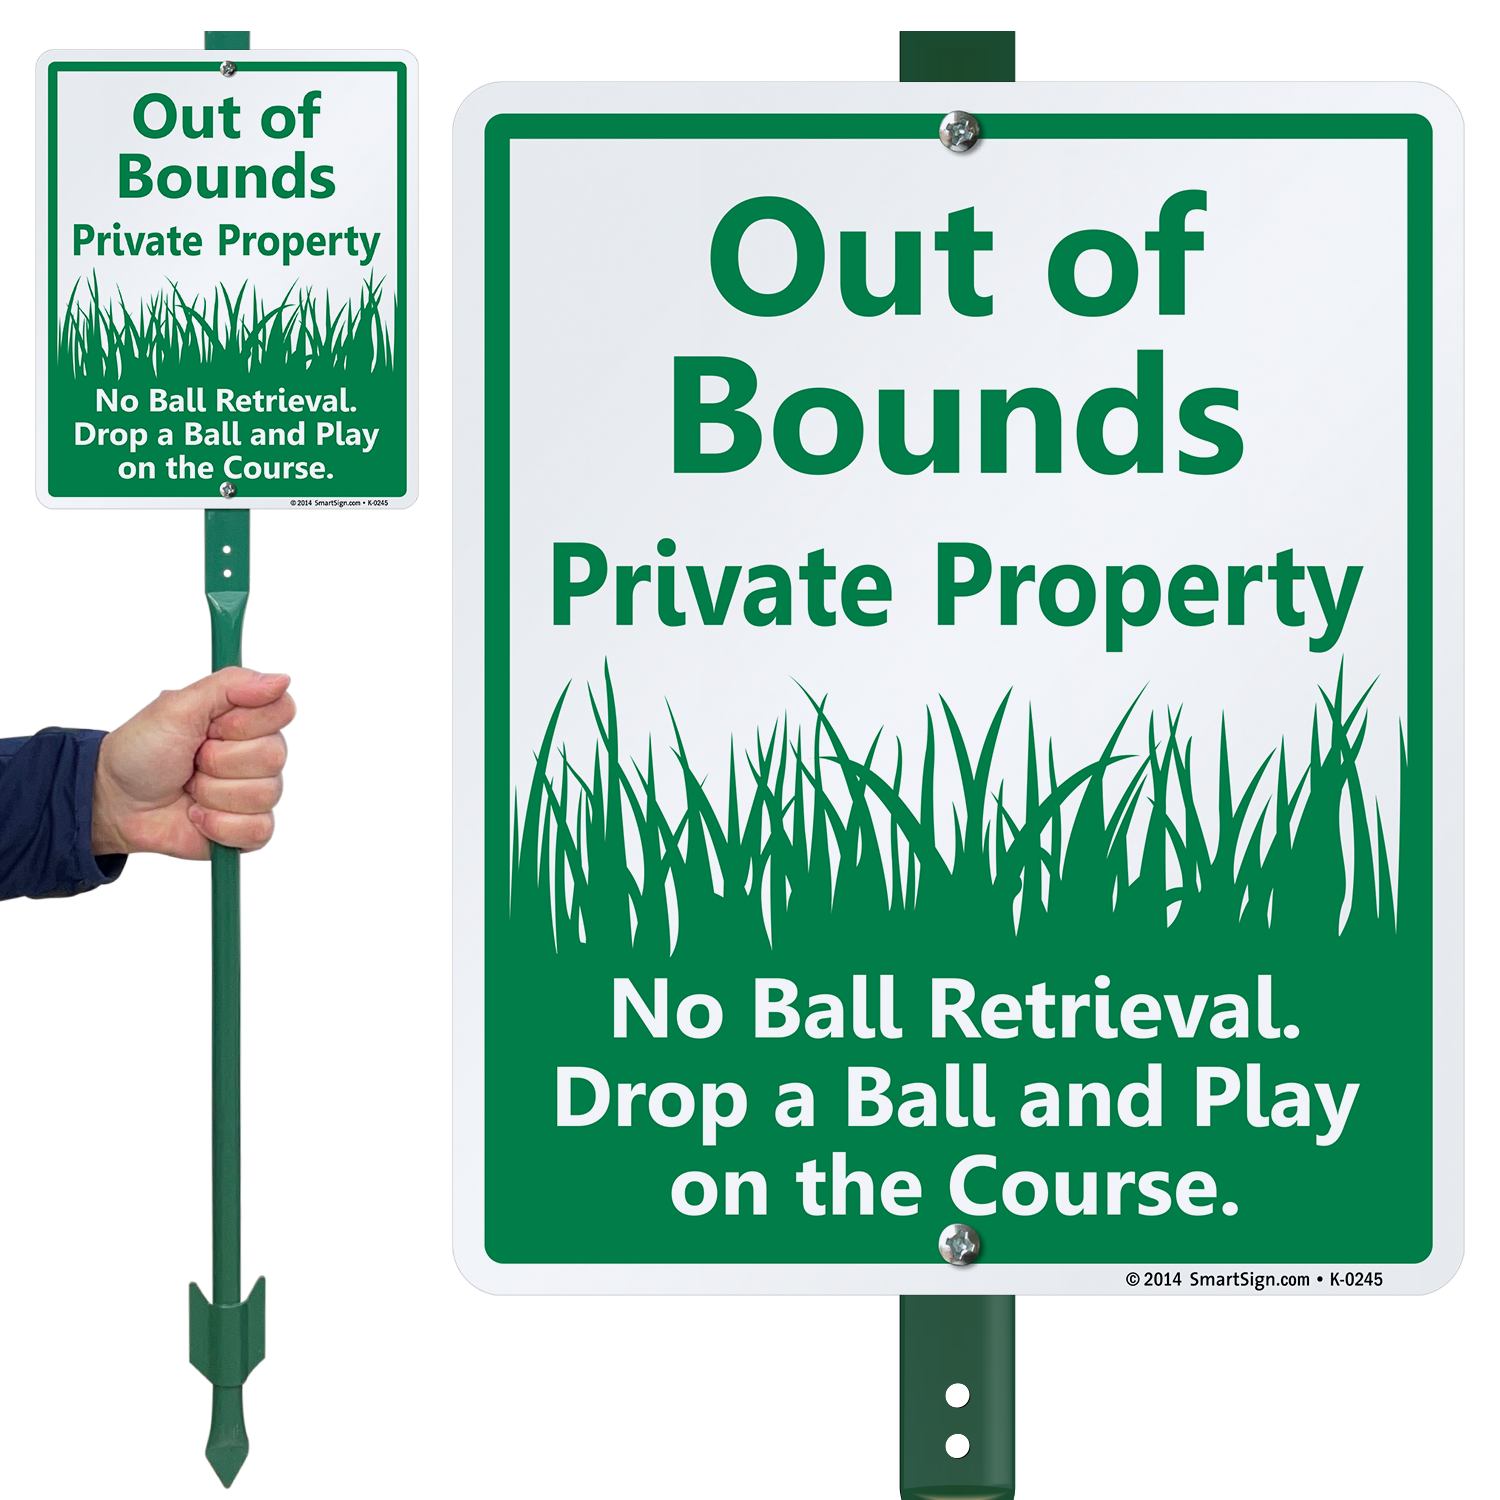 Out of bounds for length java. Out of bounds. Out of bounds meaning. Private property. Private property right illustrations.